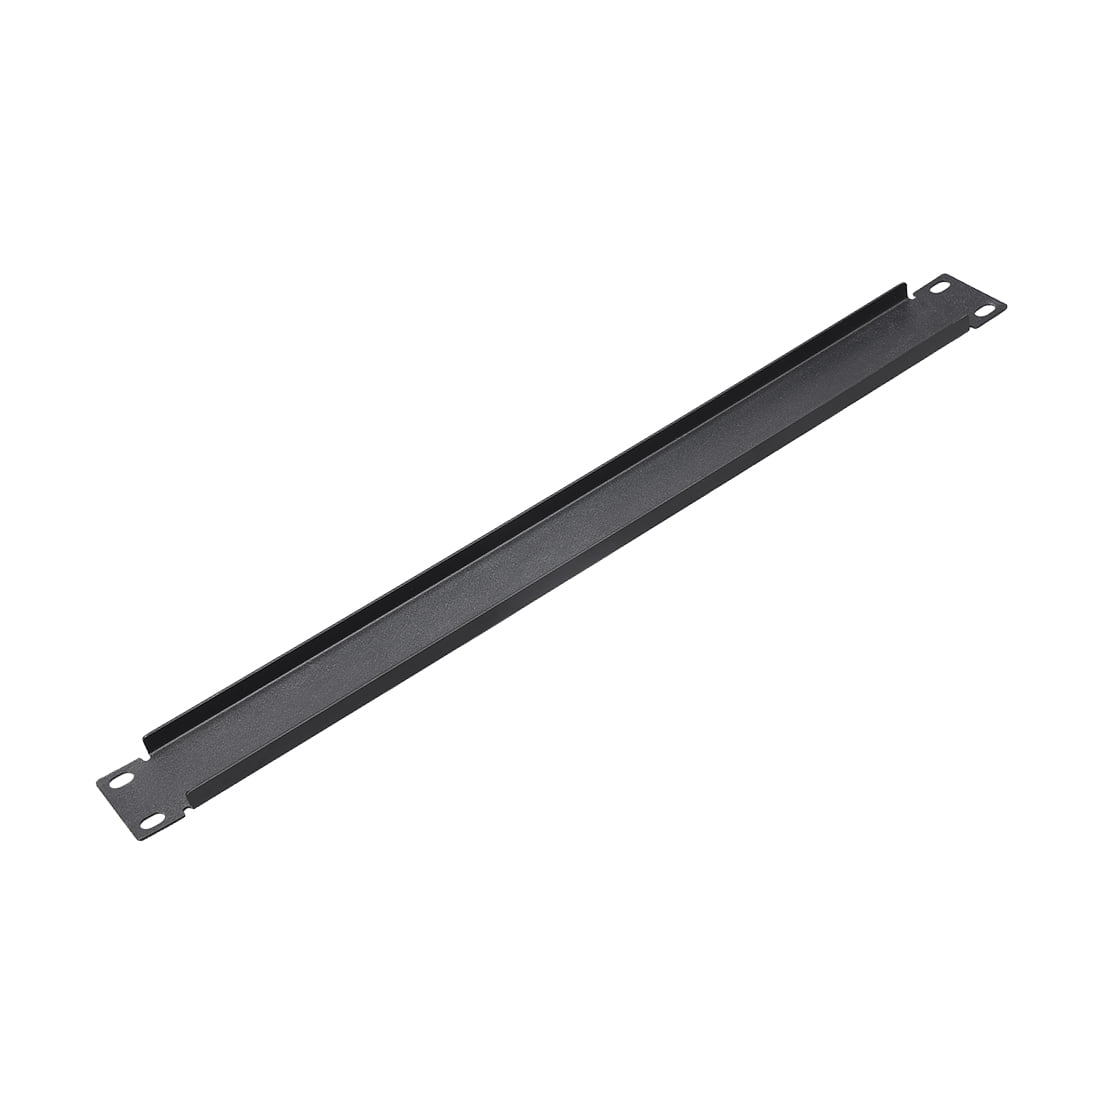 Jingchengmei 1U New Disassembled Blank Rack Mount Panel for 19-Inch Server Rack Enclosure or Network Cabinet Black 